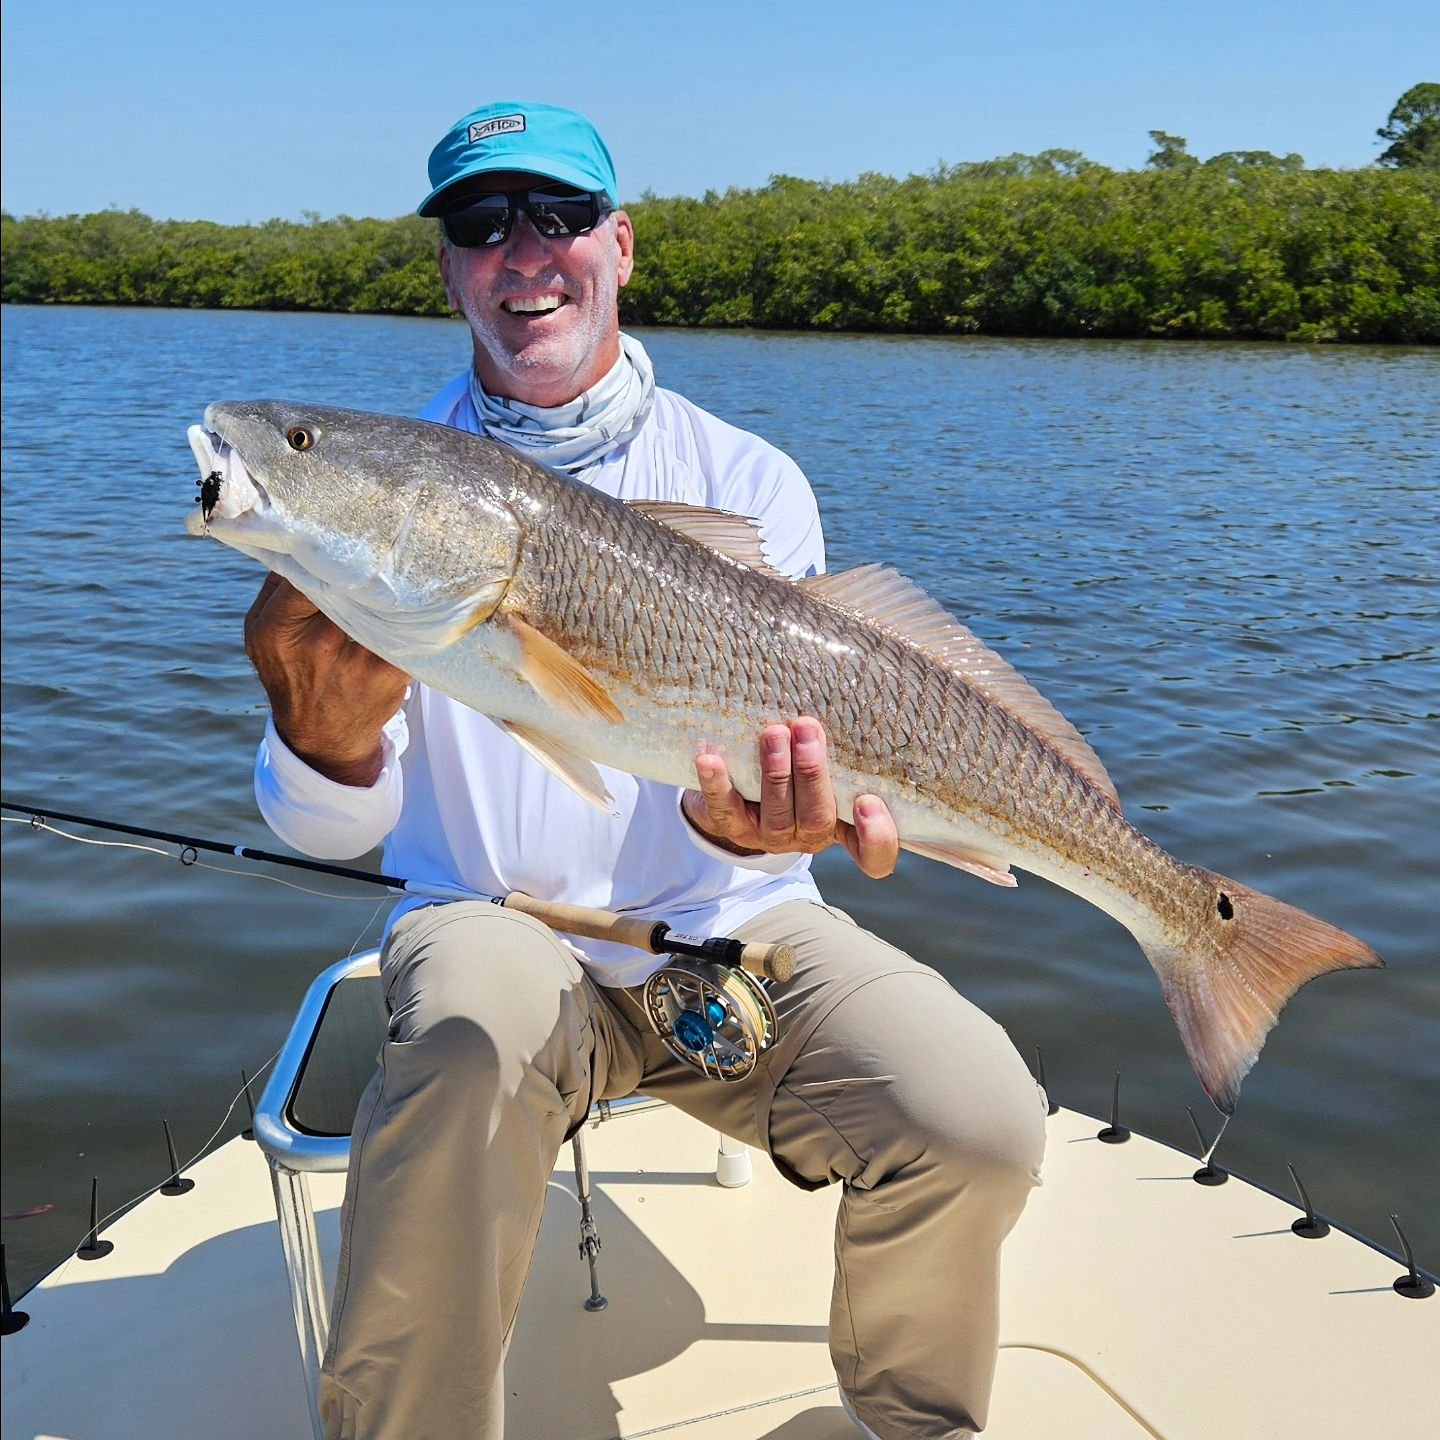 Bob had a some good fishing the past few days with plenty of #redfish action. Tarpon time soon!